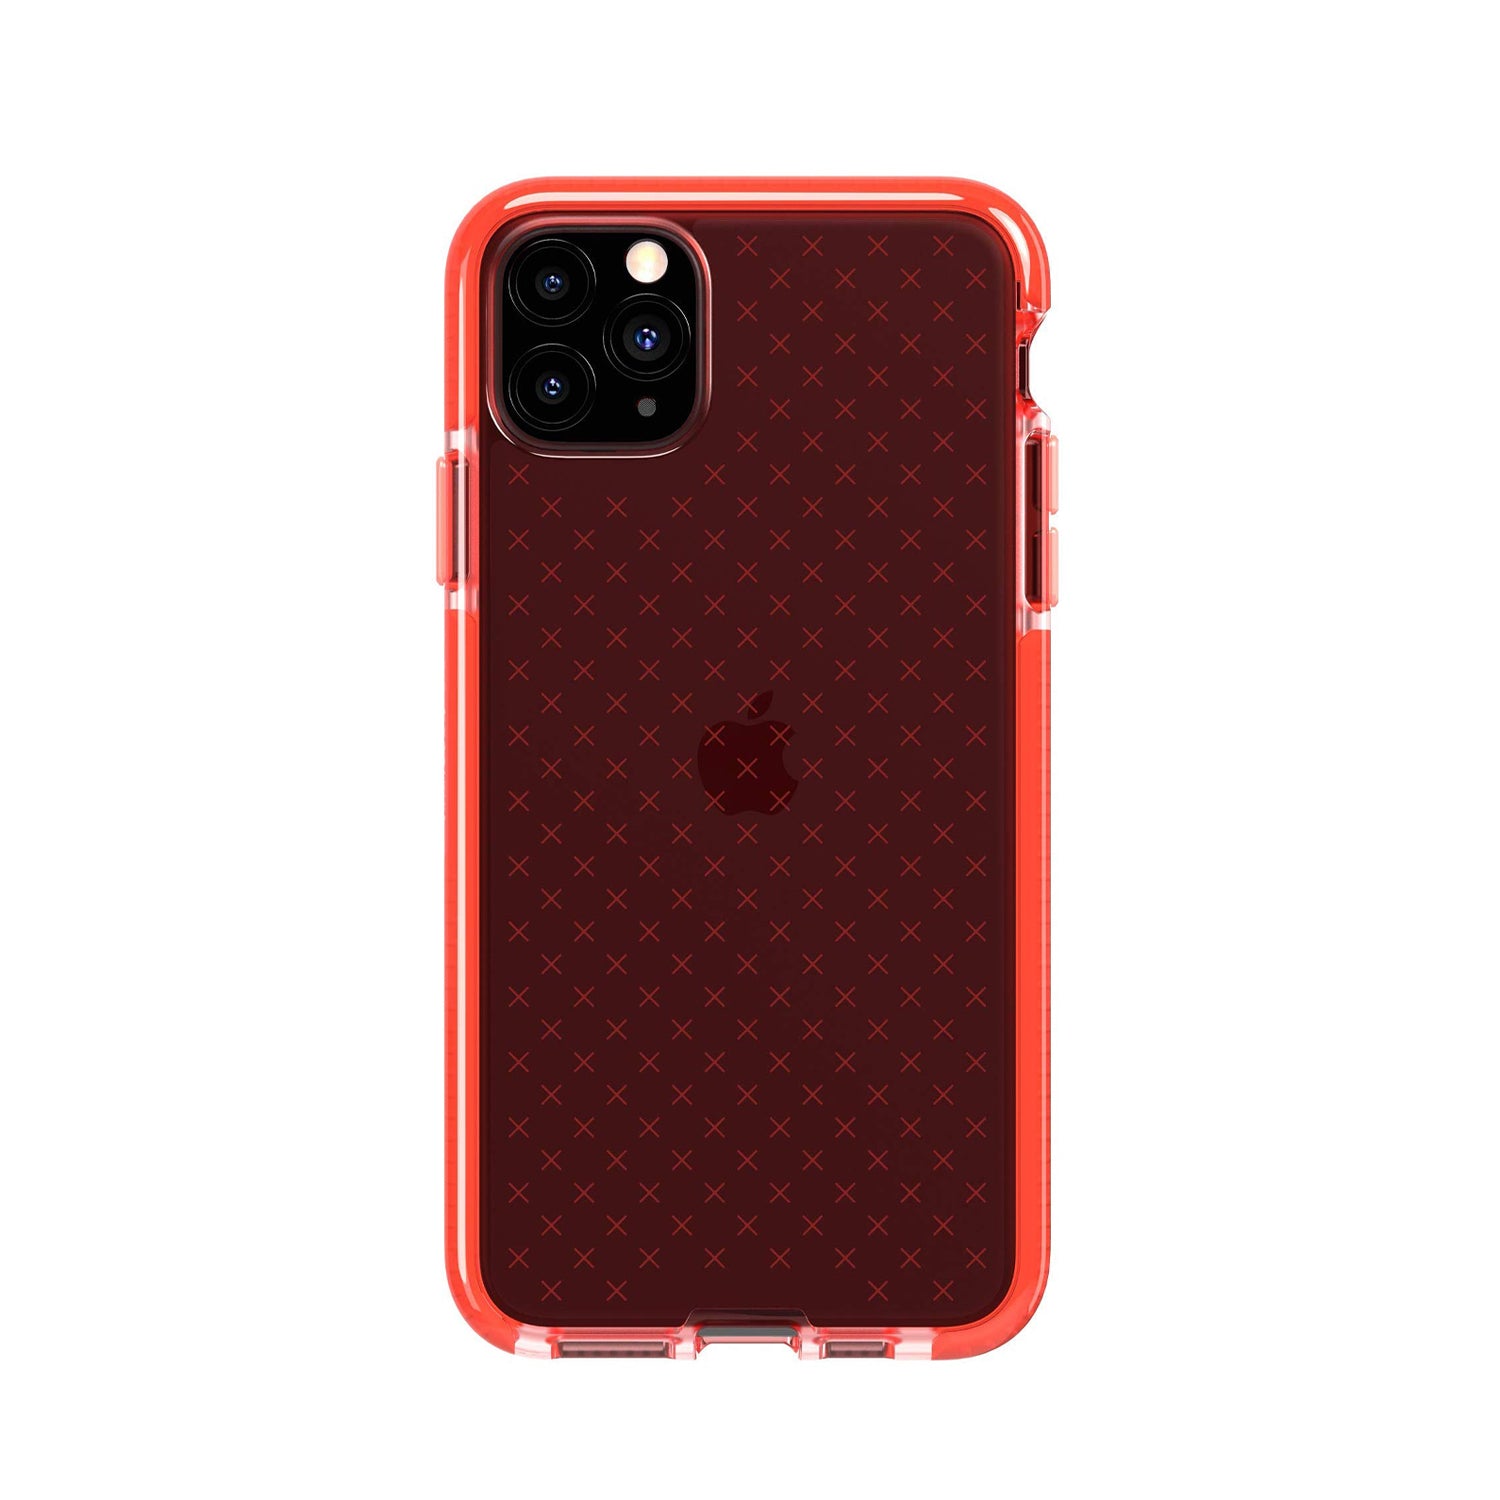 Tech21 iPhone 11 Pro / X / XS Case Evo Check Rugged Coral